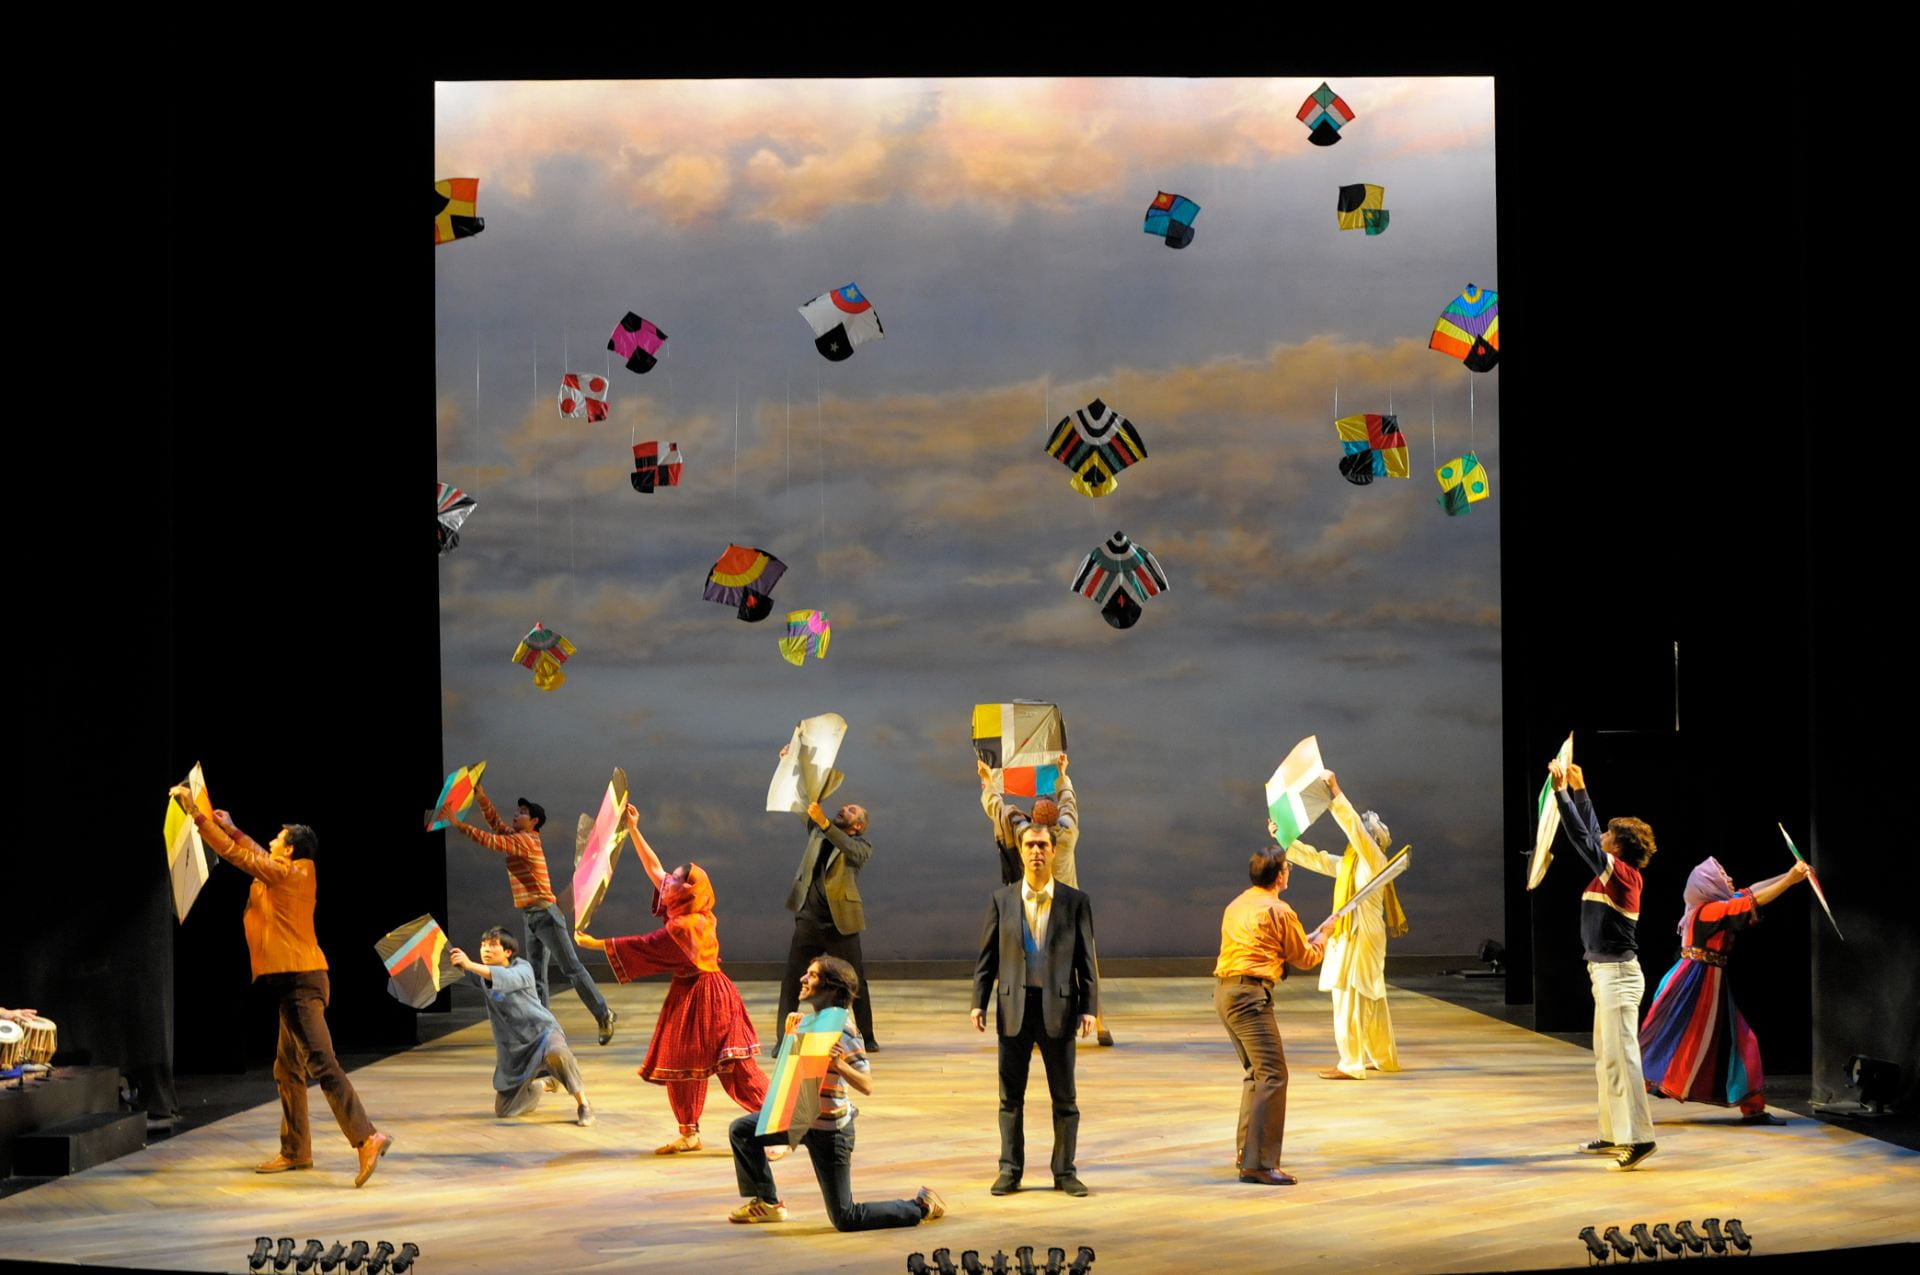 people on a stage holding kites